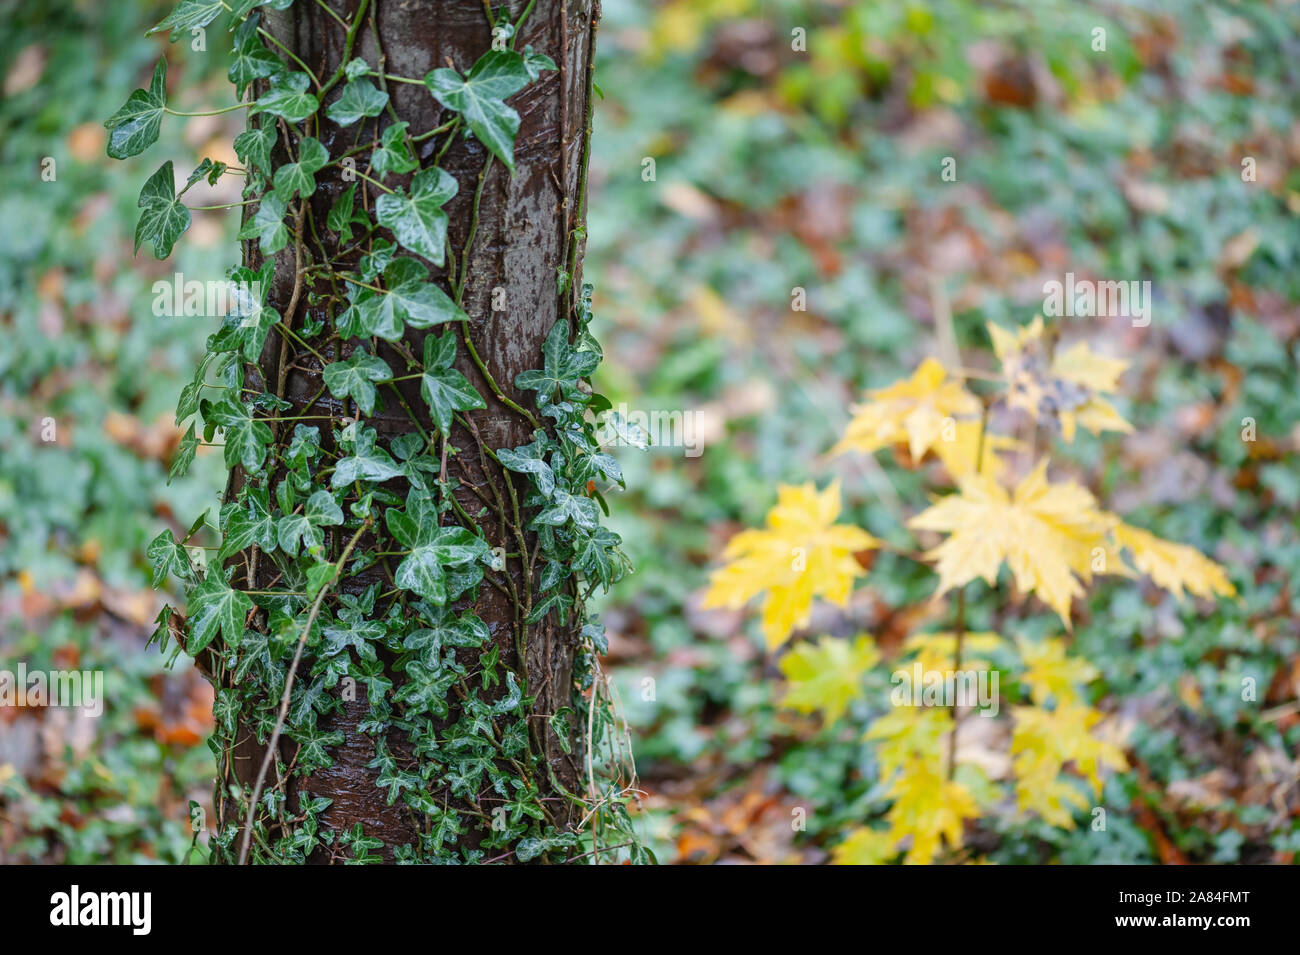 Tree trunk with ivy growing up, yellow autumn leaves in the background. Stock Photo